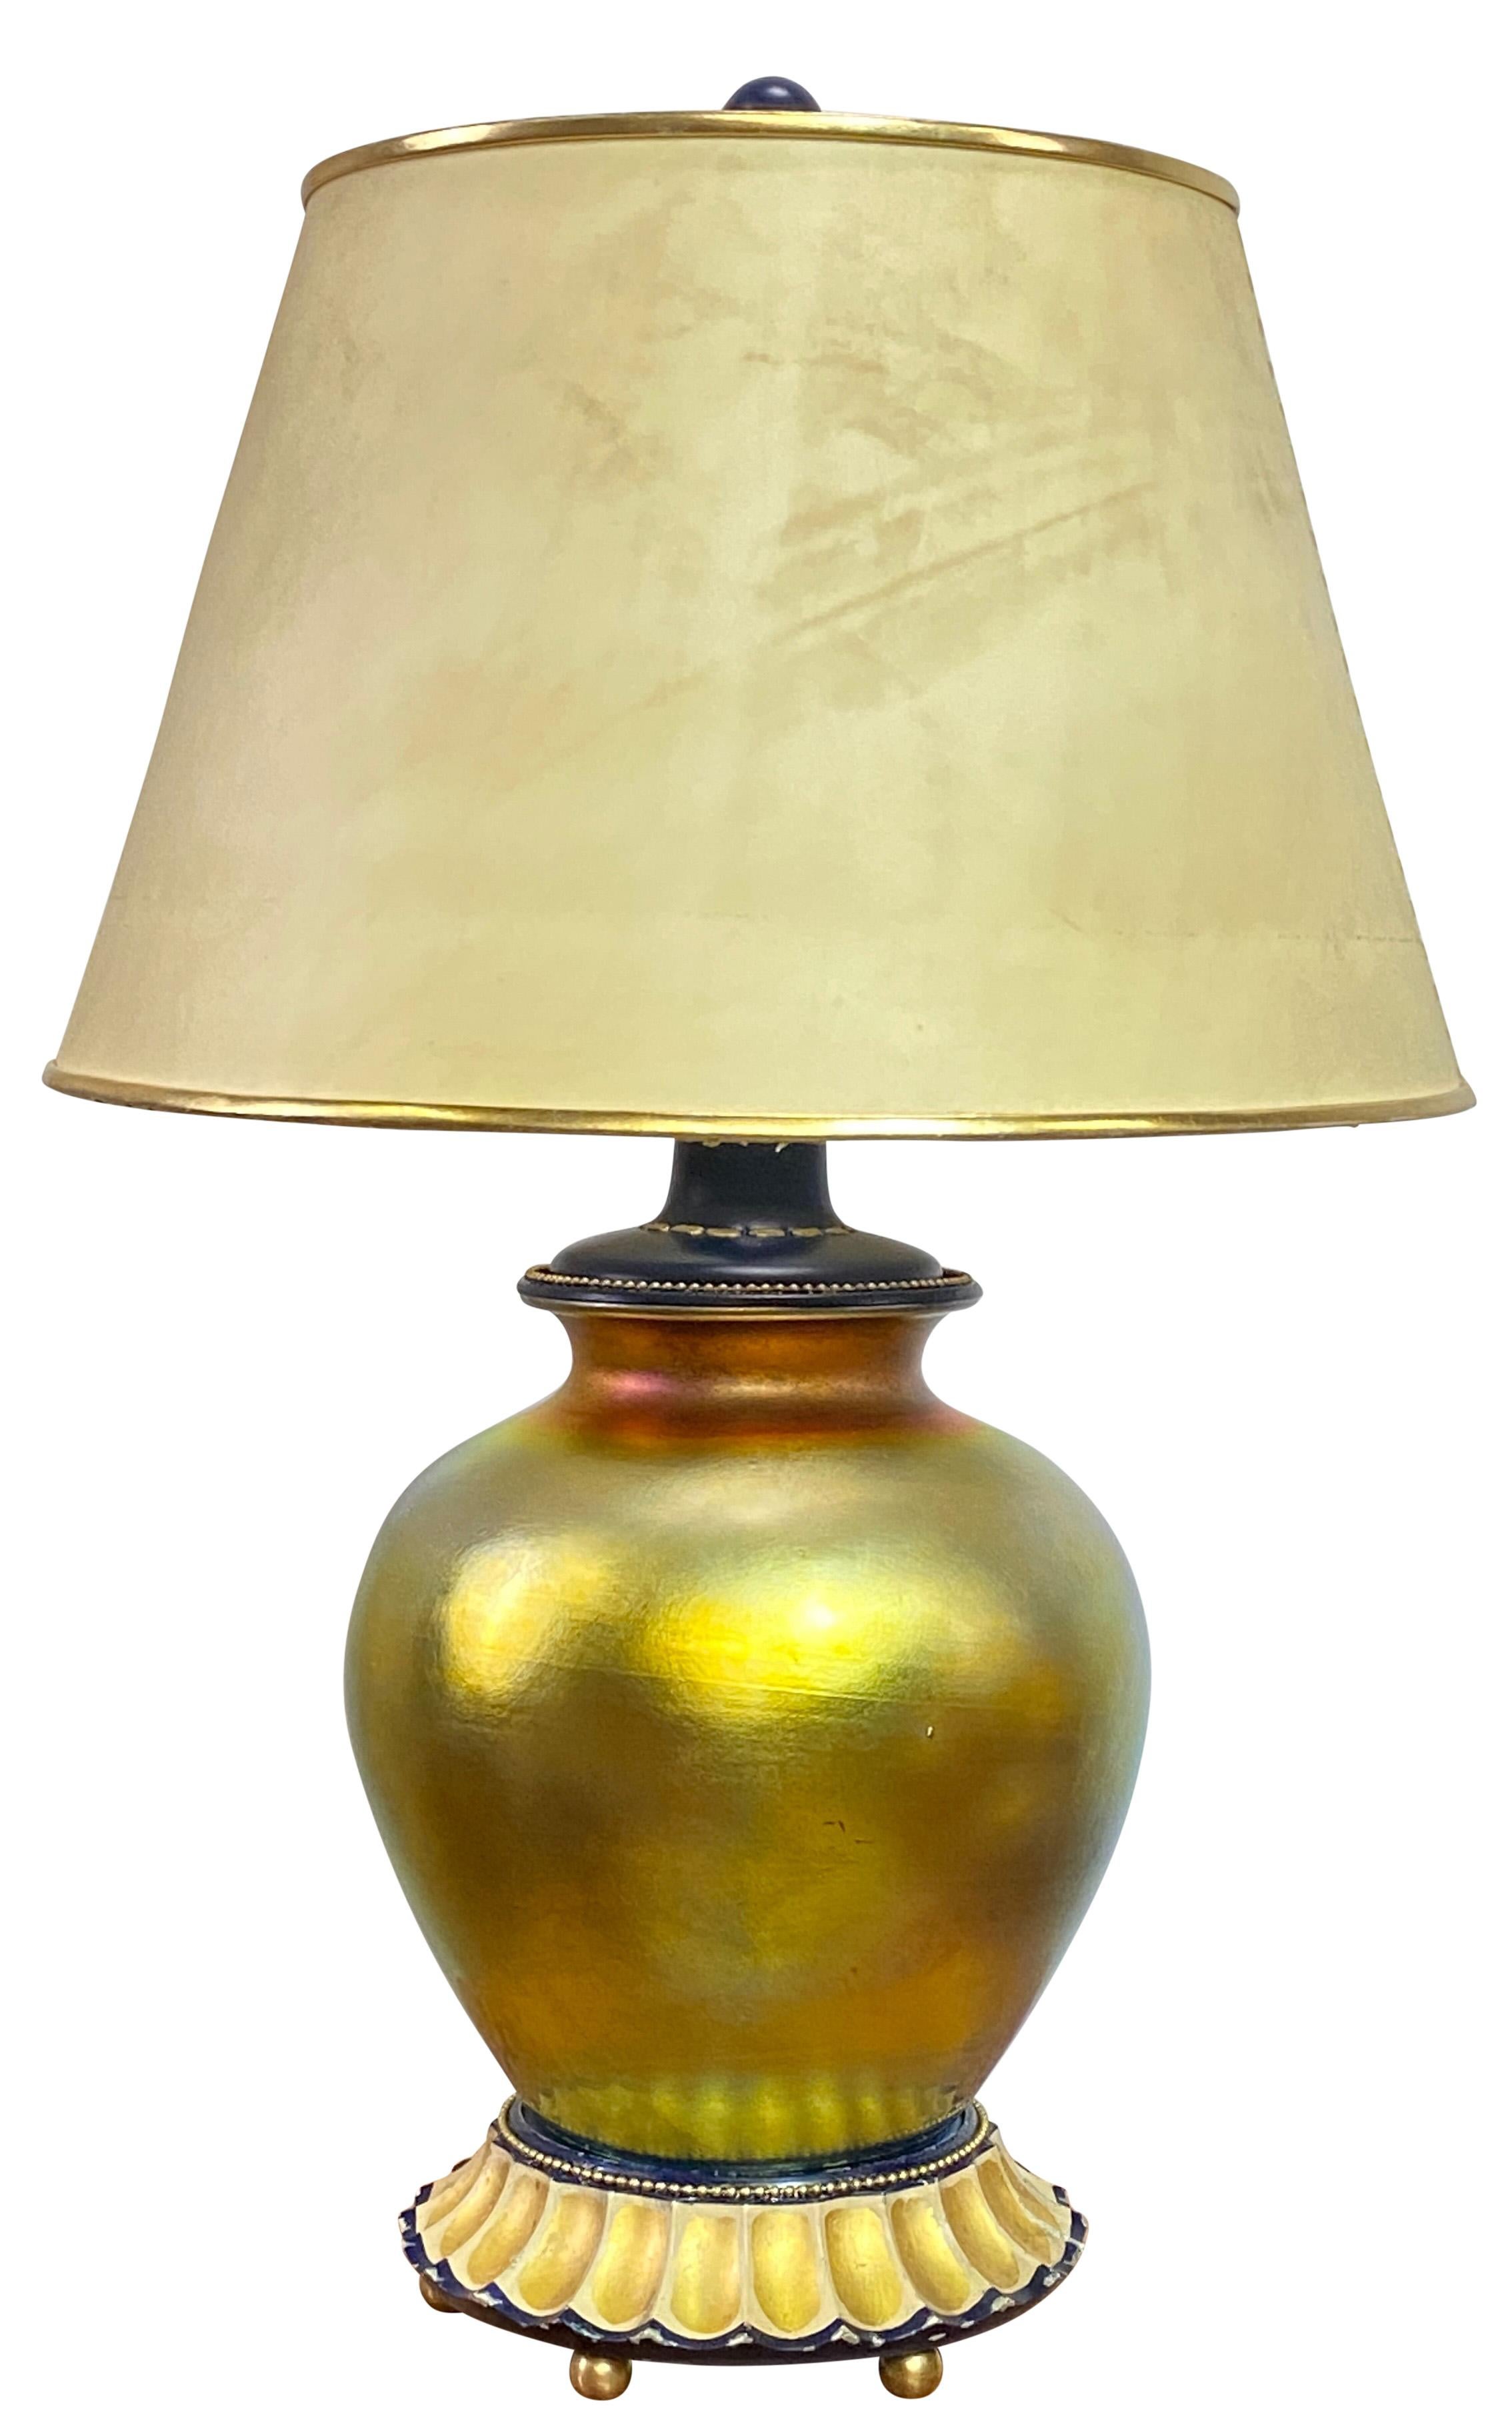 Antique Steuben Gold Aurene Art Glass Table Lamp, Early 20th Century For Sale 1